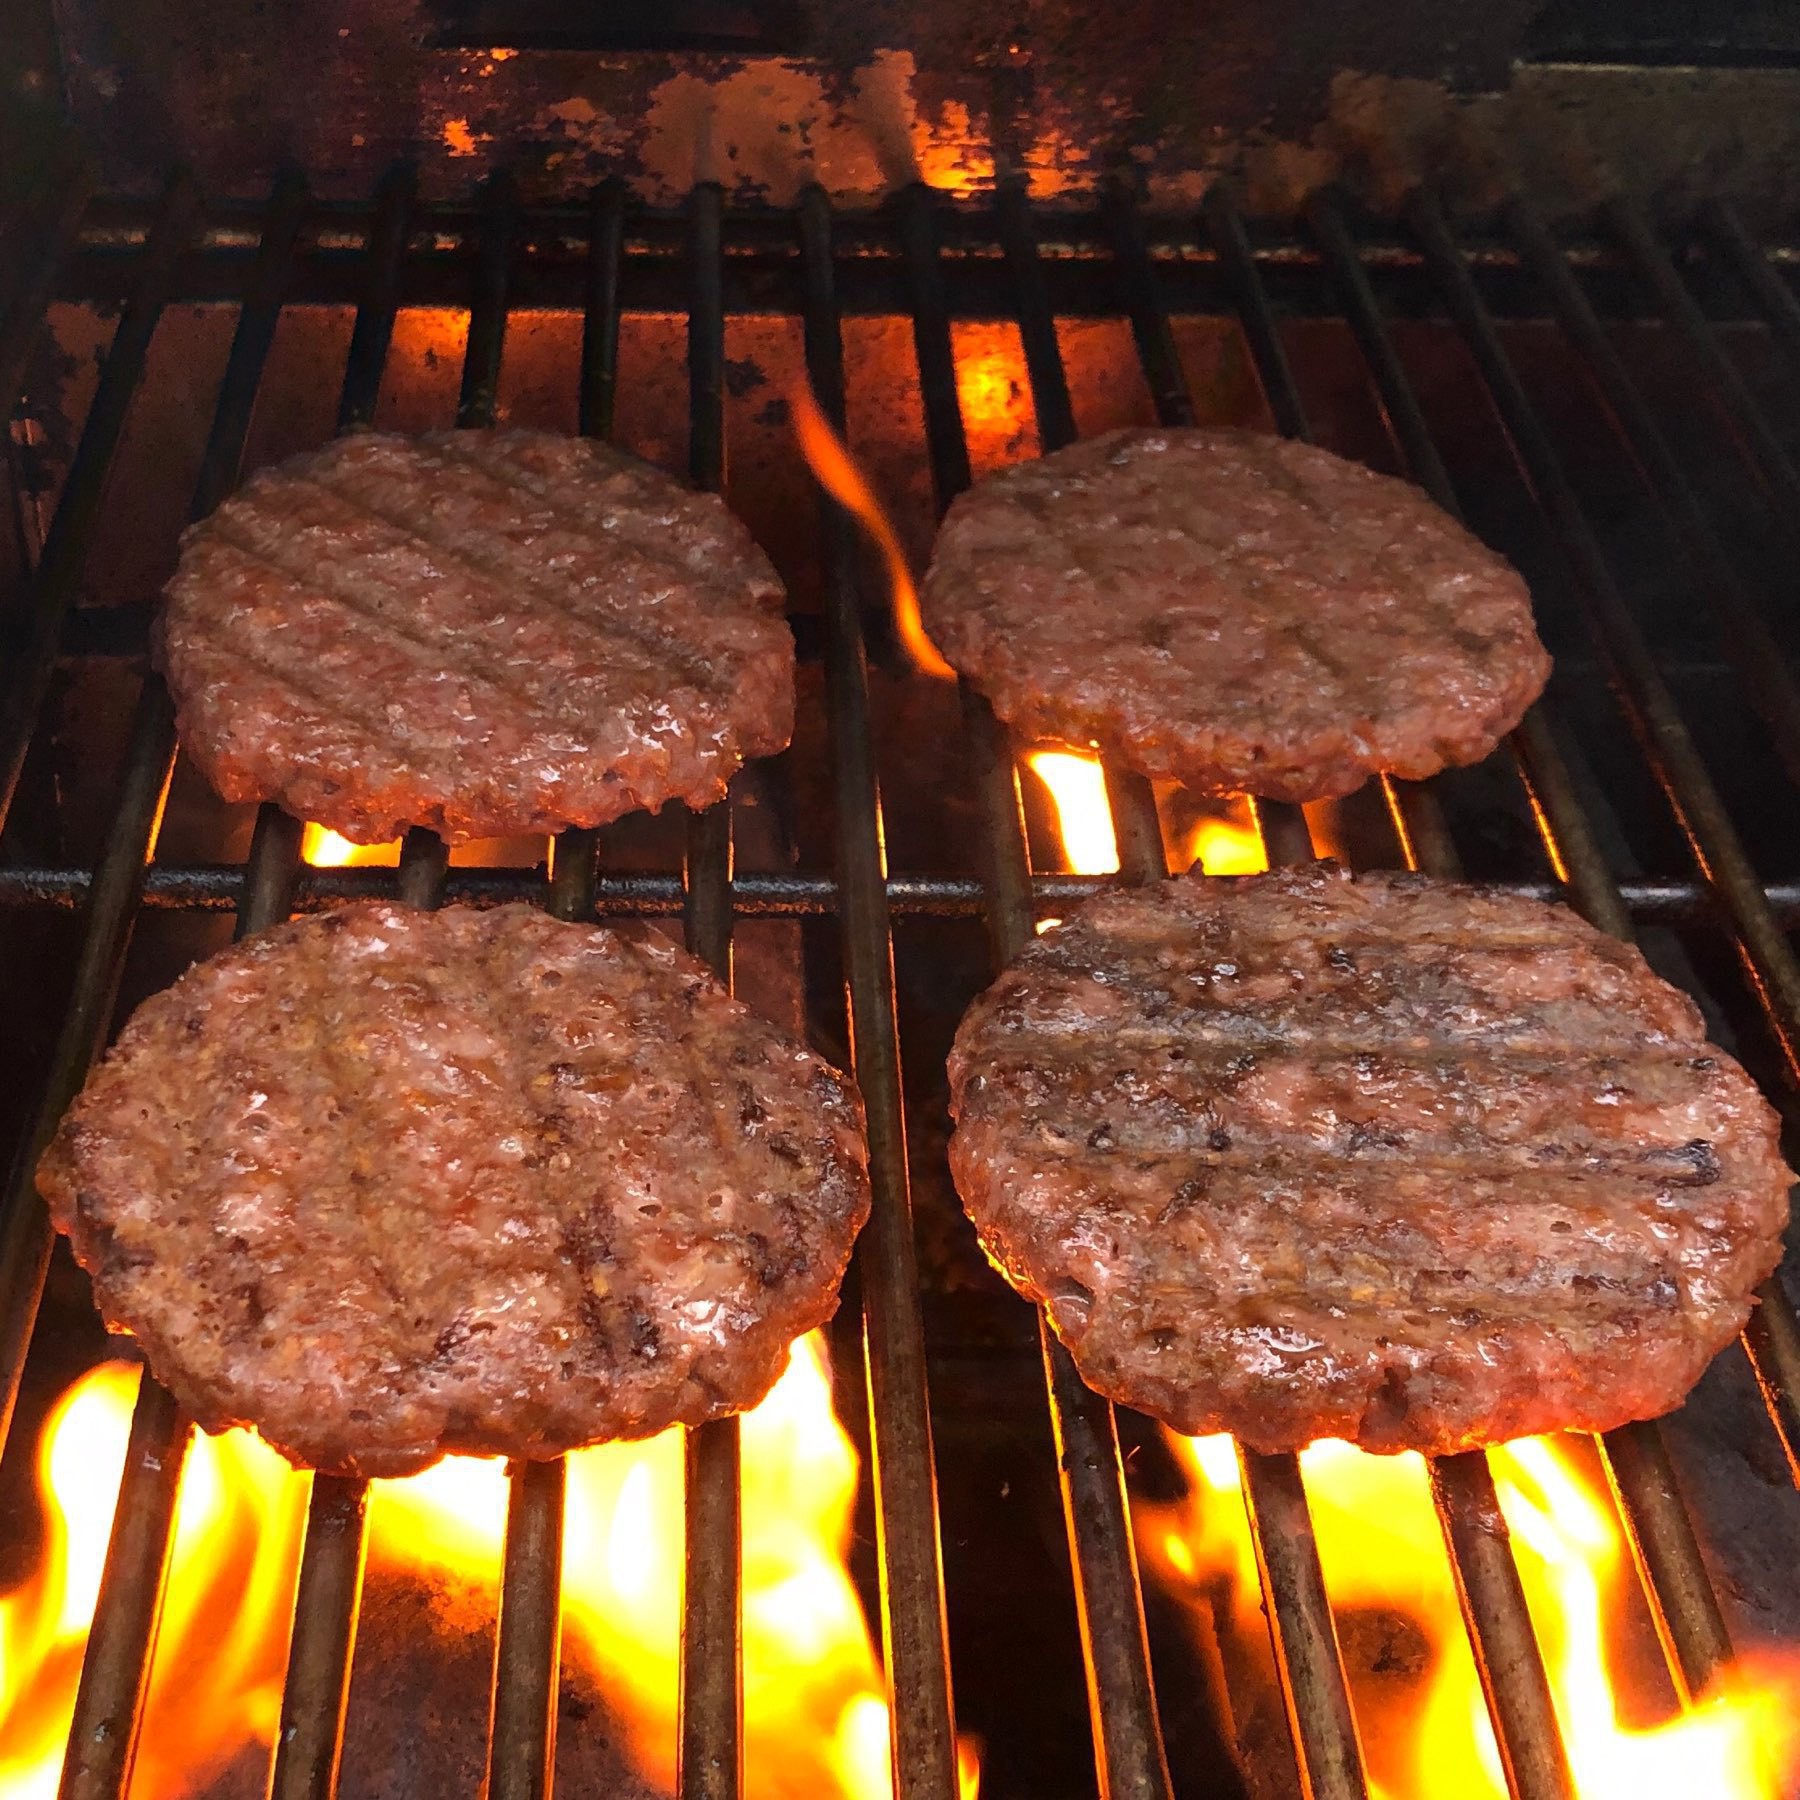 Four meat-like veggie burgers sizzling on a flame grill.